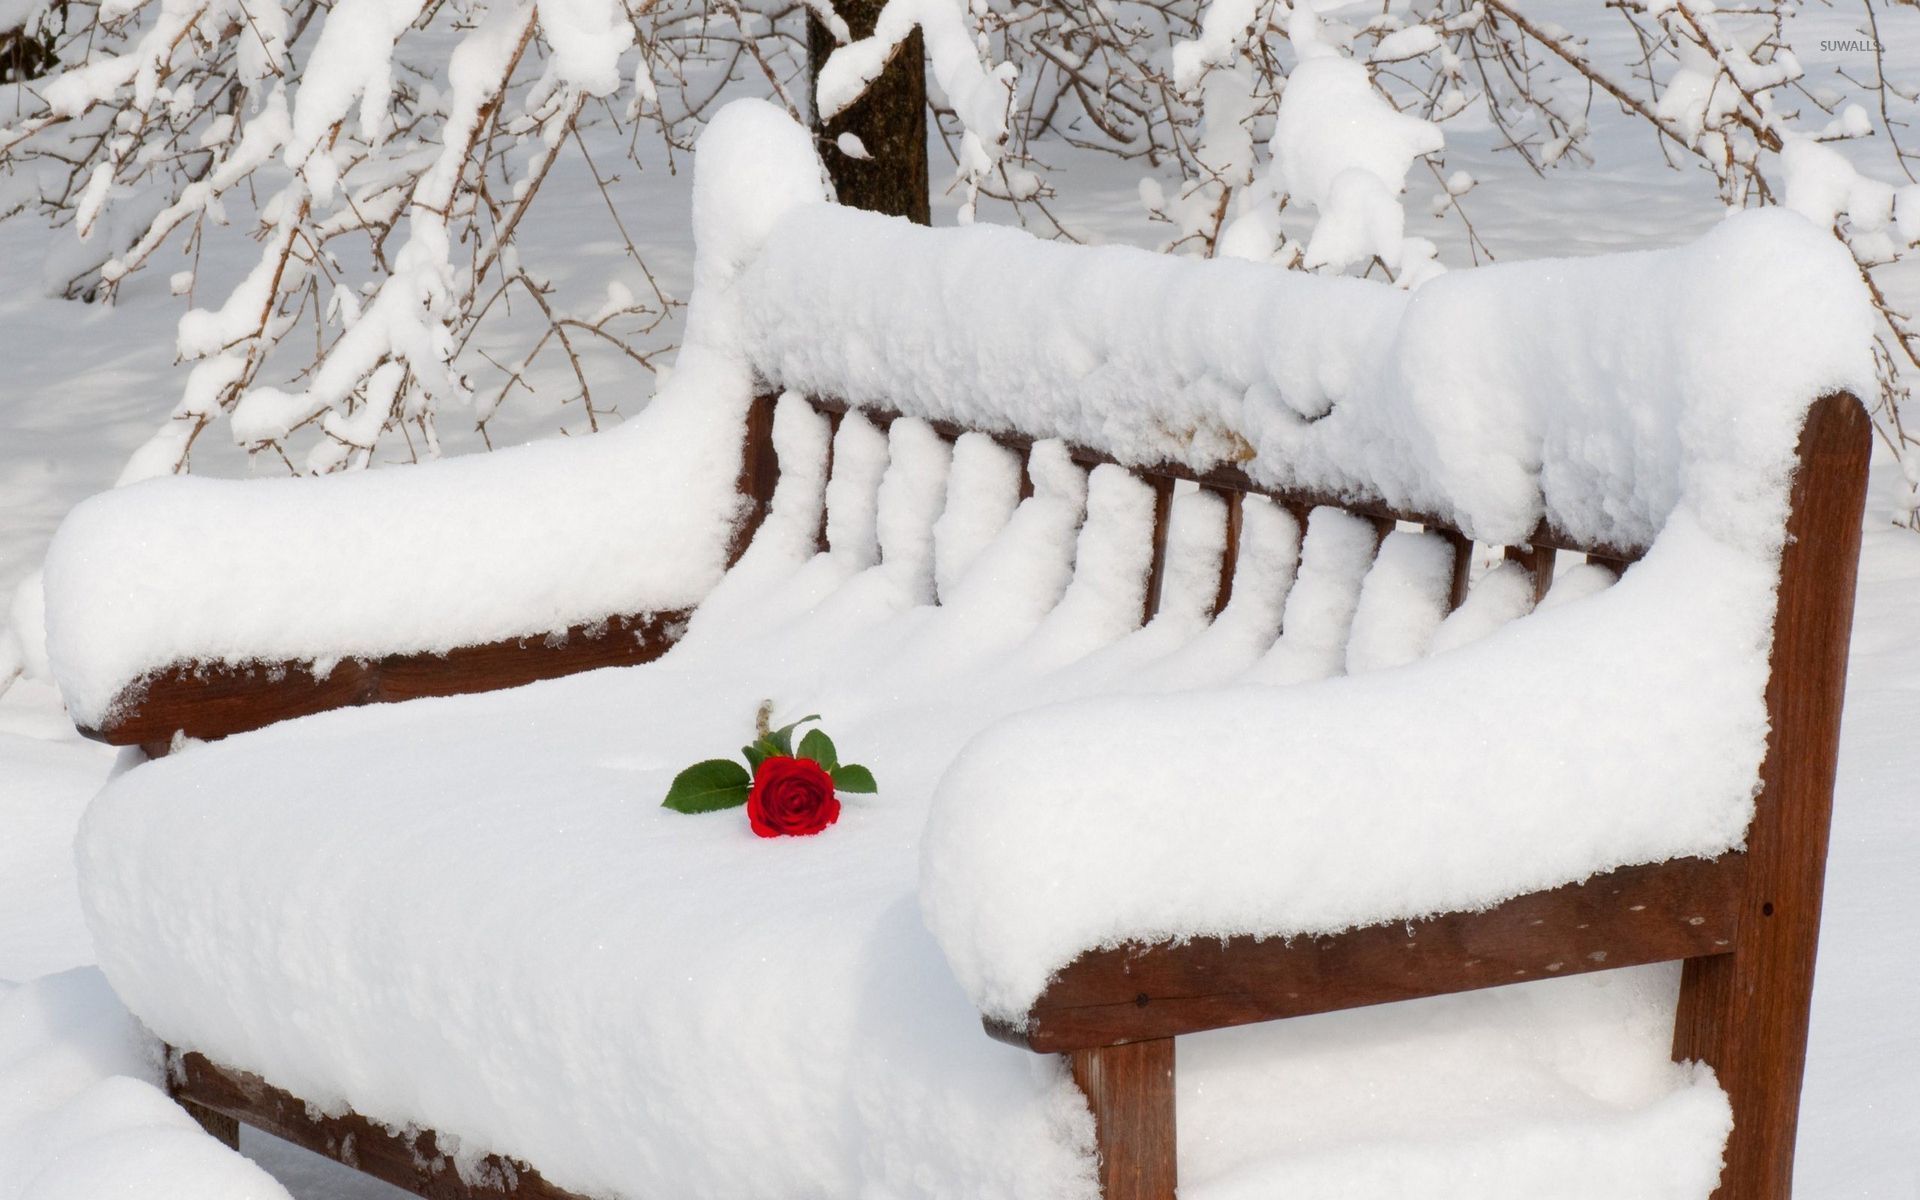 Red rose on the thick snow resting on the wooden bench wallpaper wallpaper